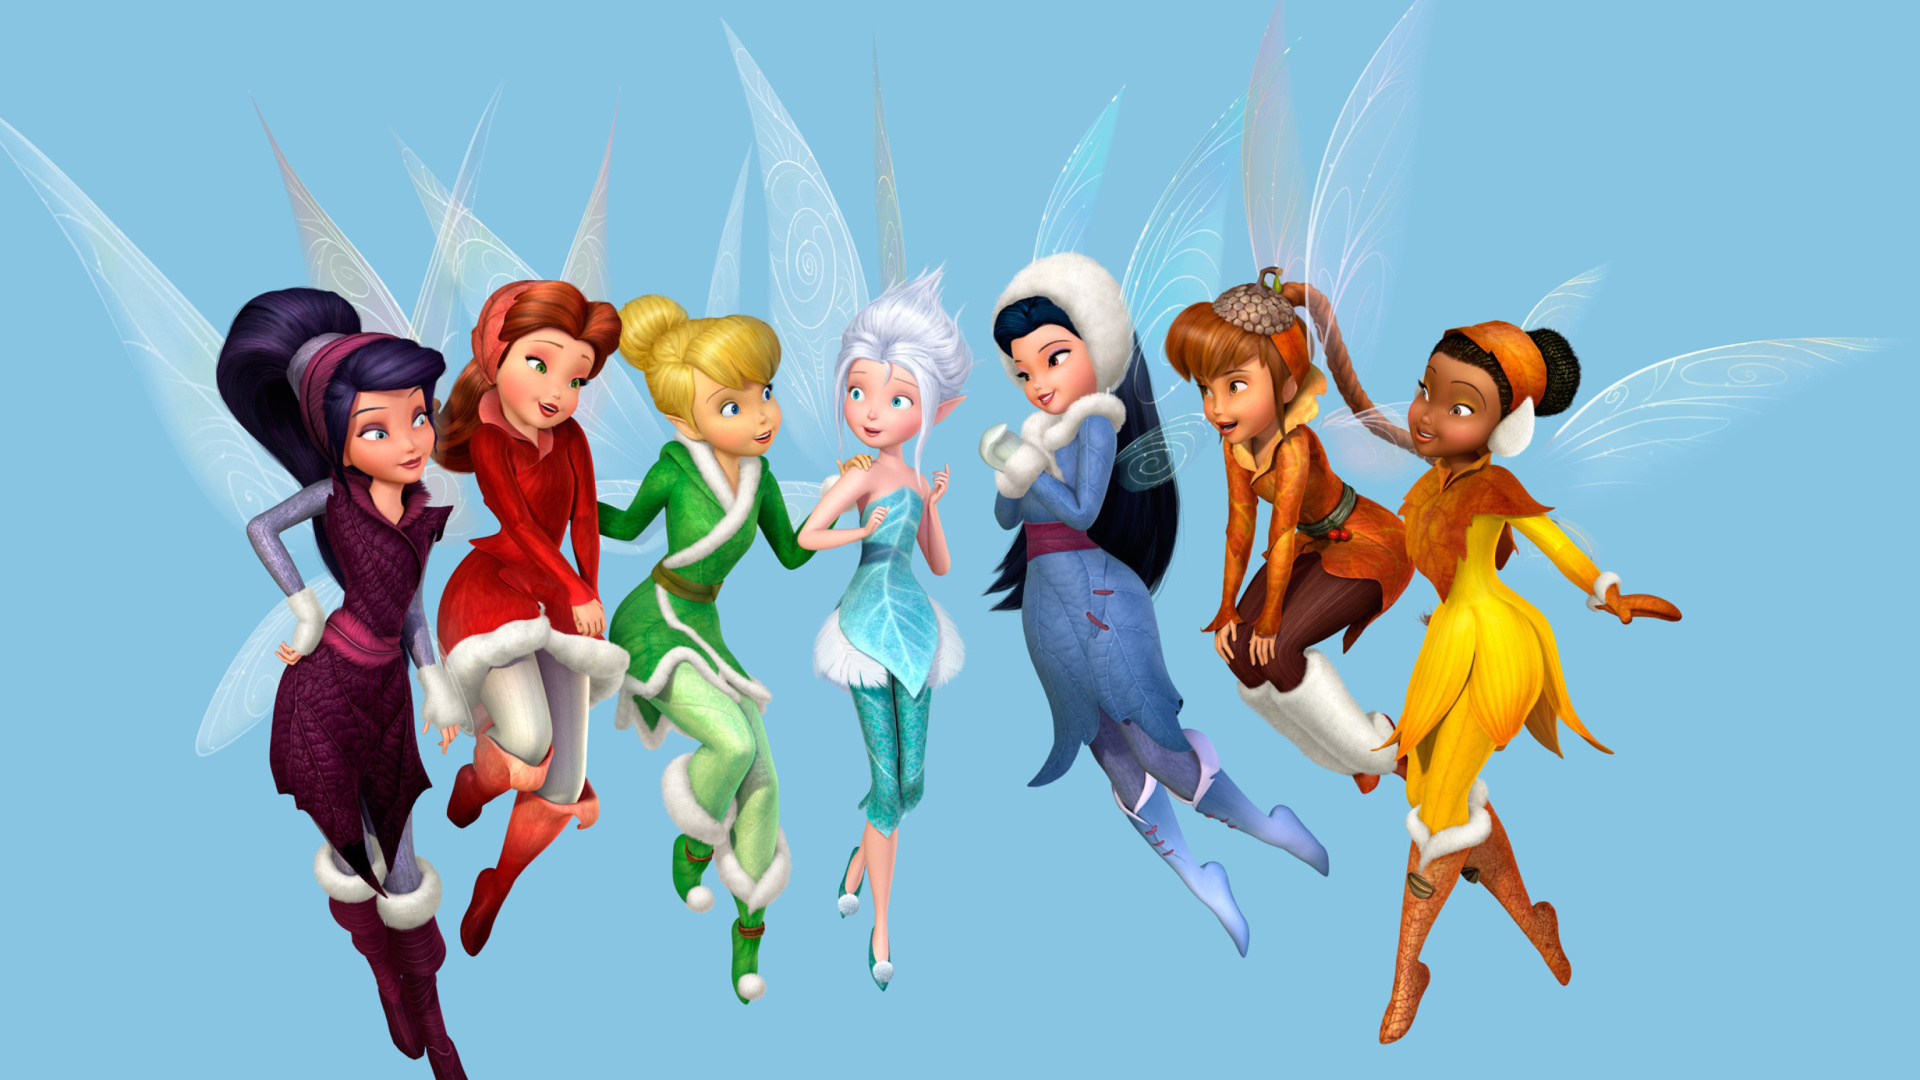 Tinkerbell and the Mysterious Winter Woods wallpaper 1920x1080